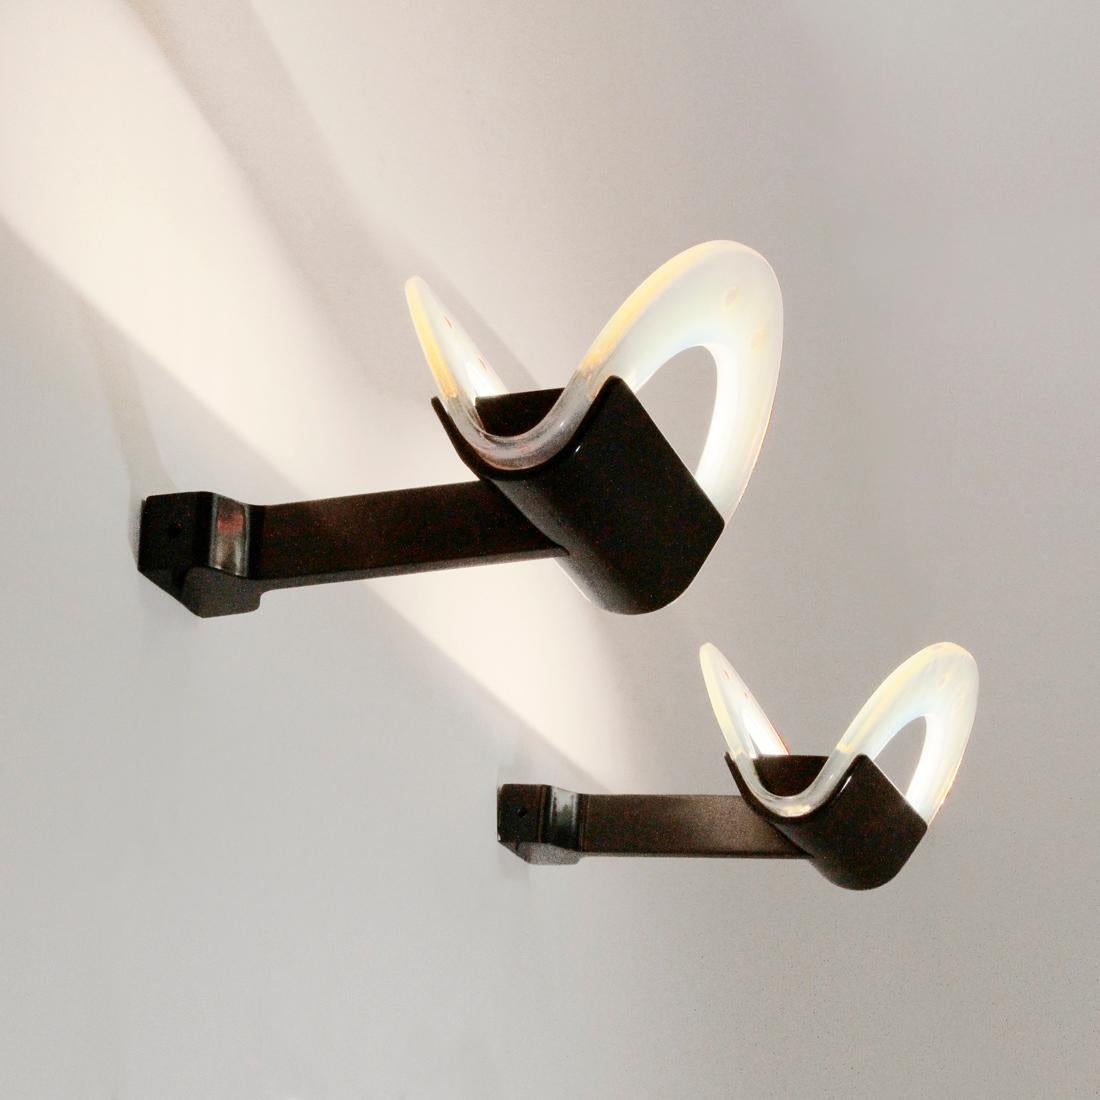 Pair of Luna Wall Lamps by Roberto Pamio for Leucos, 1980s For Sale 6